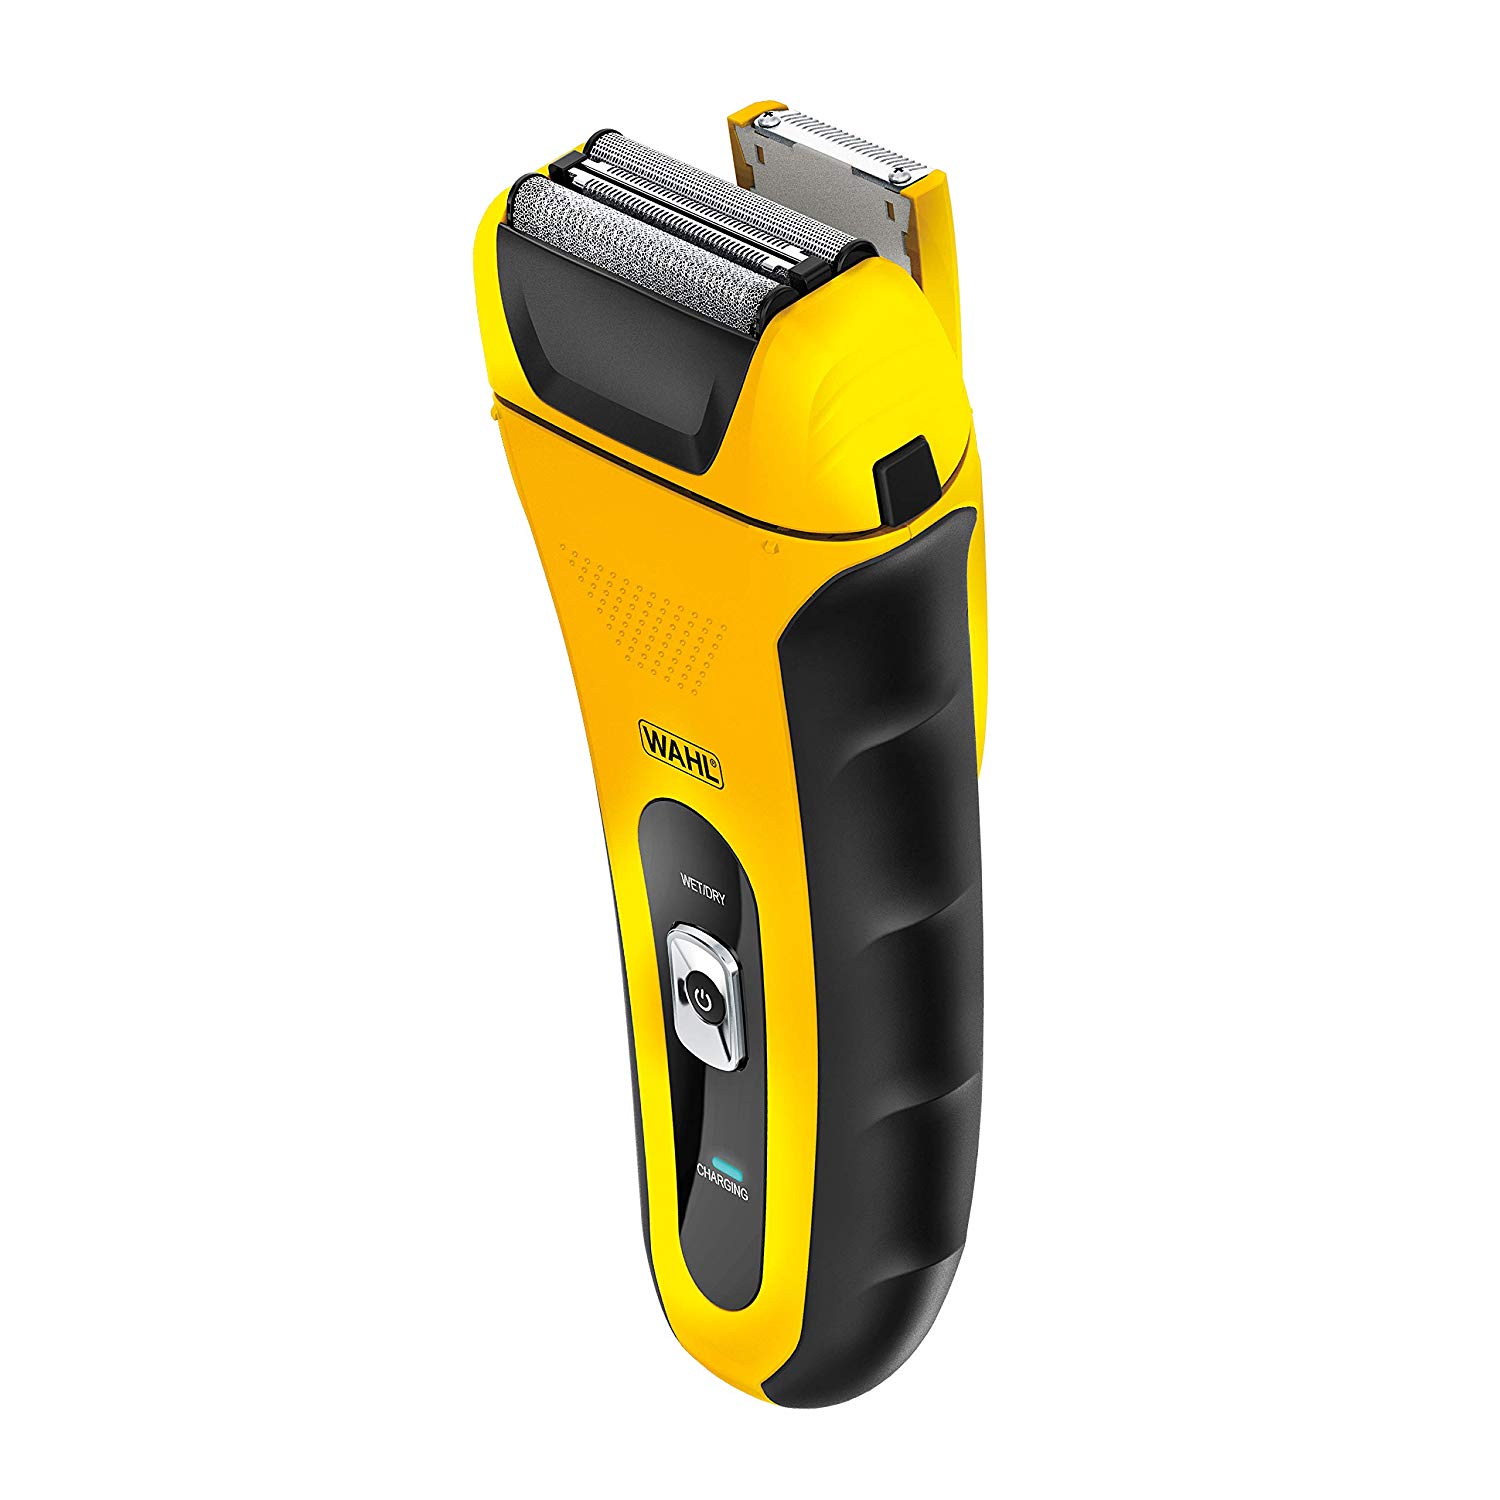 Wahl Lithium-ion on Amazon